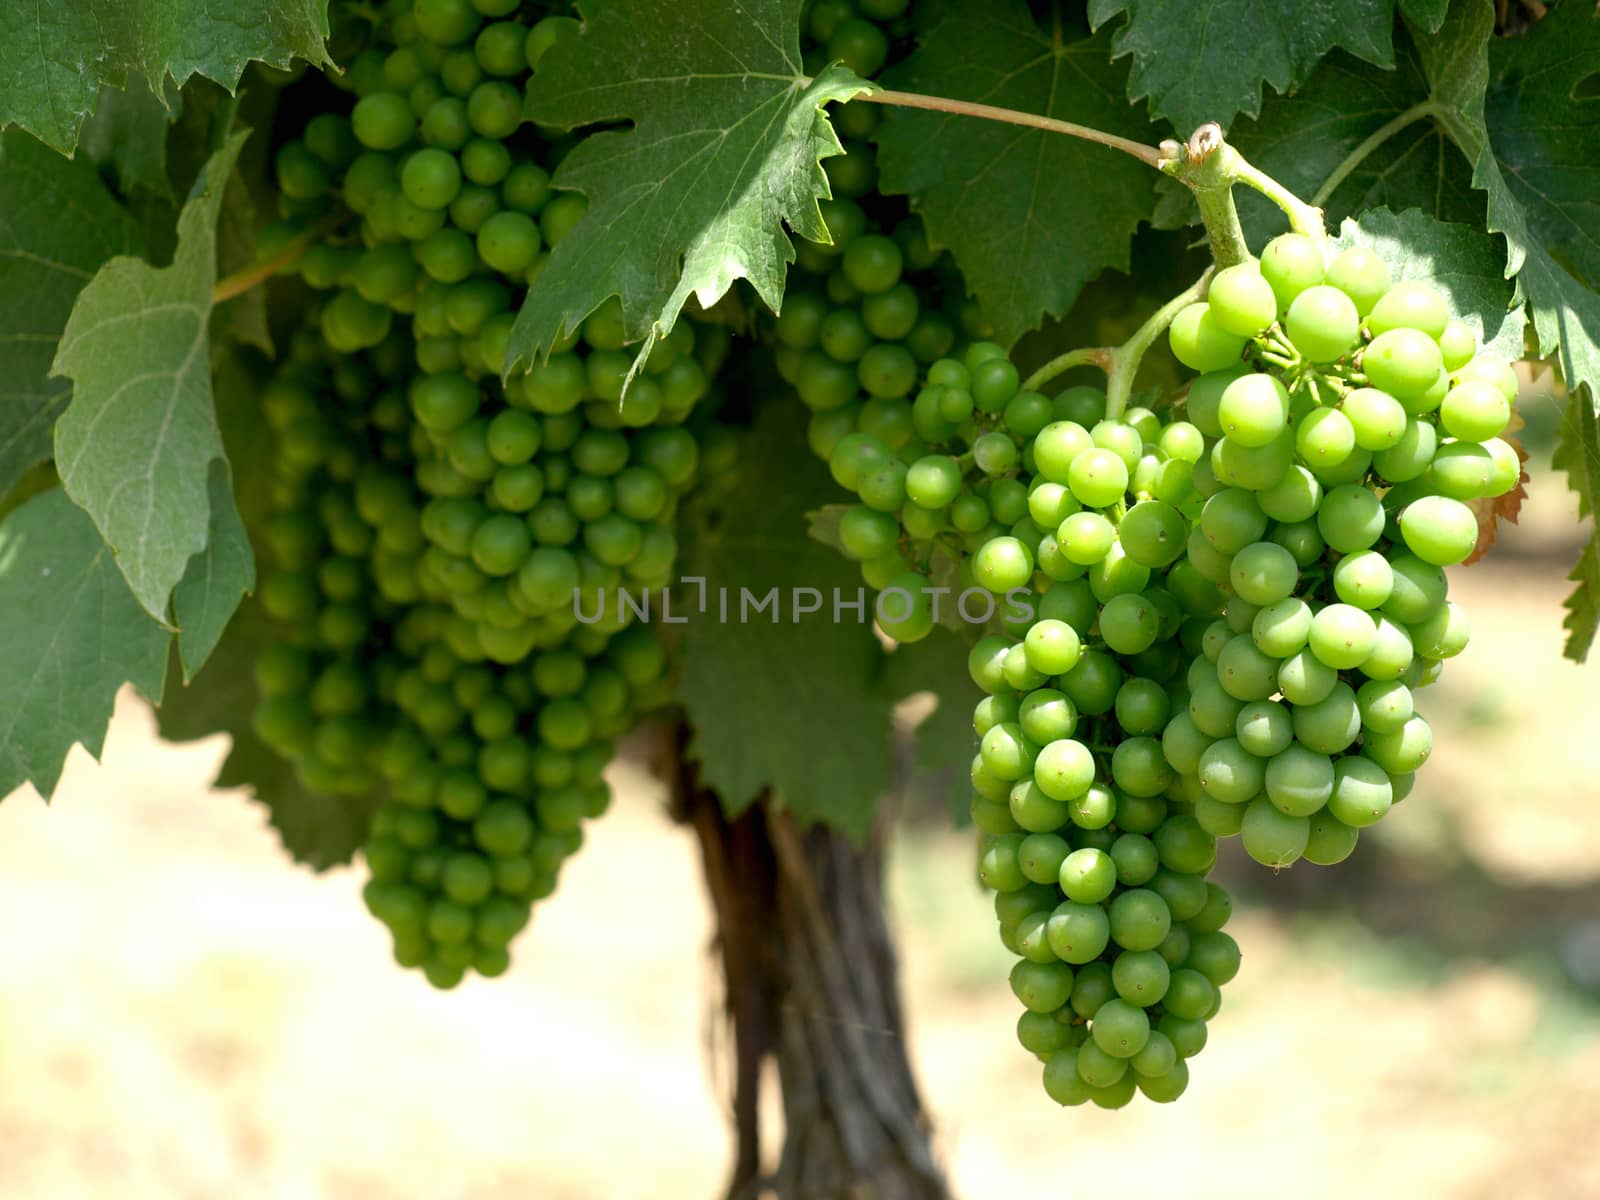 green grapes on the vine by pm29